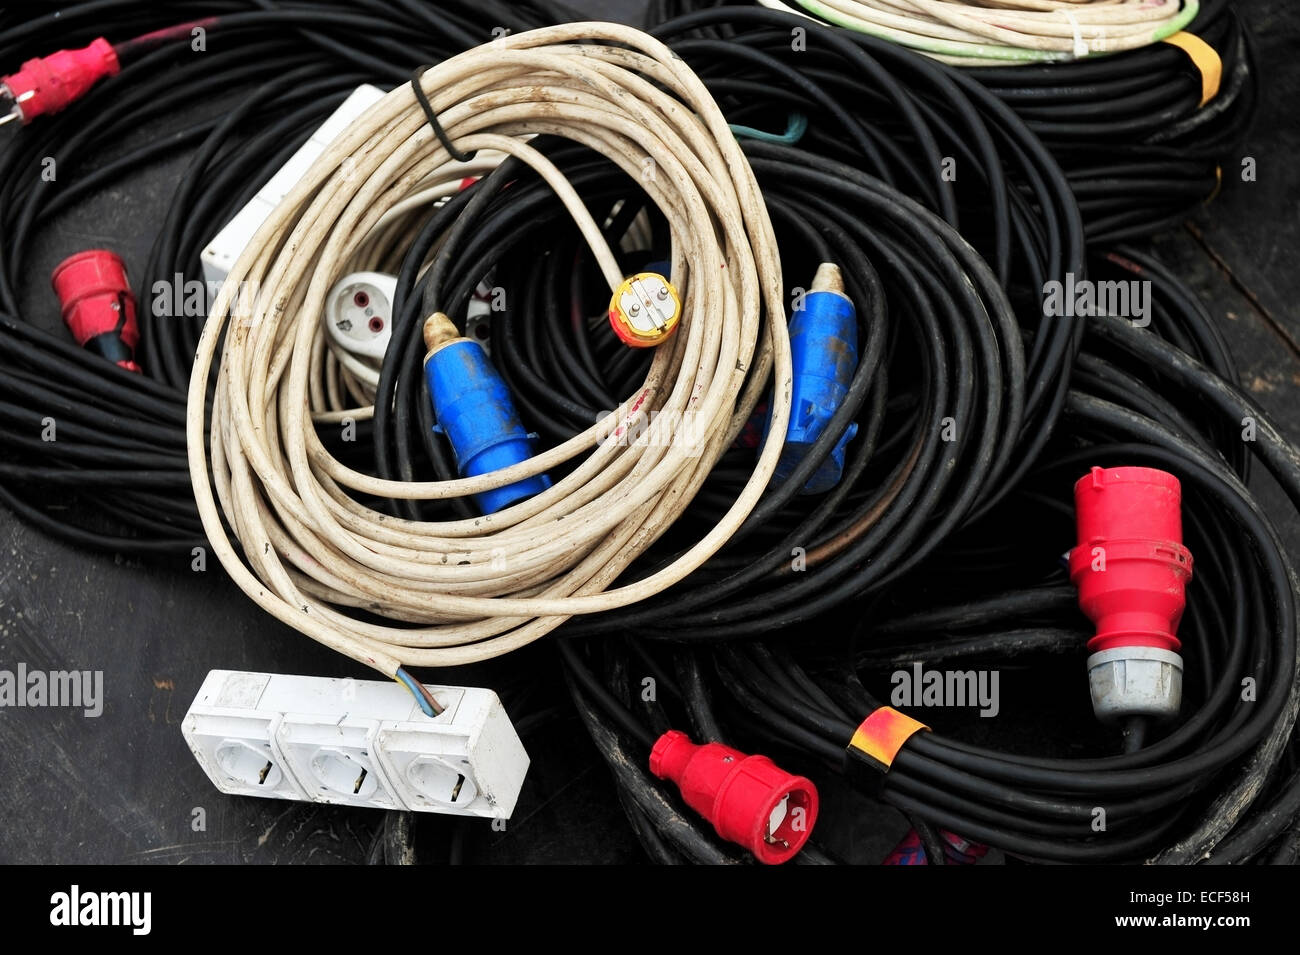 Multiple electric power cables with extension cords and plugs Stock Photo